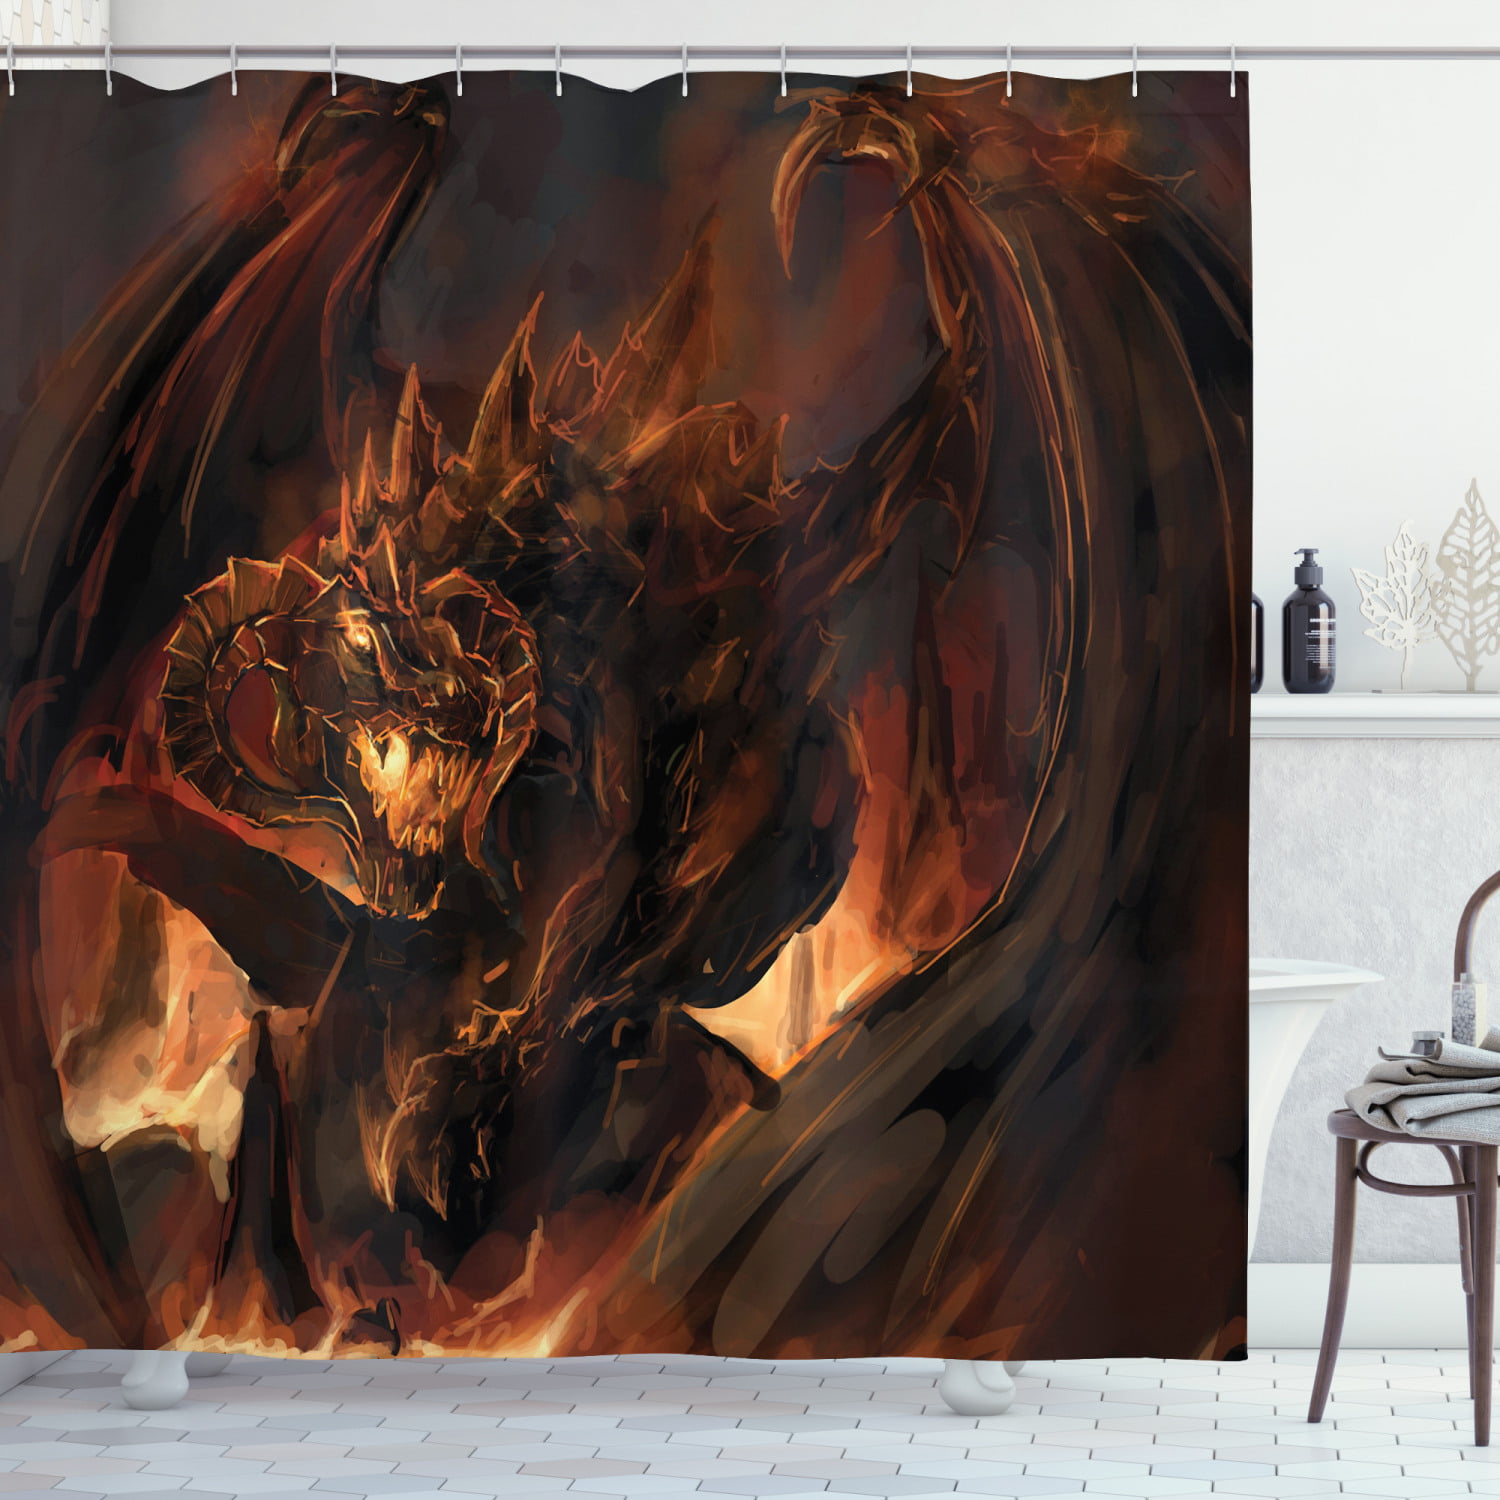 Angry Lava Dragon Shower Curtain Liner Polyester Fabric Bathroom Mat Accessories 